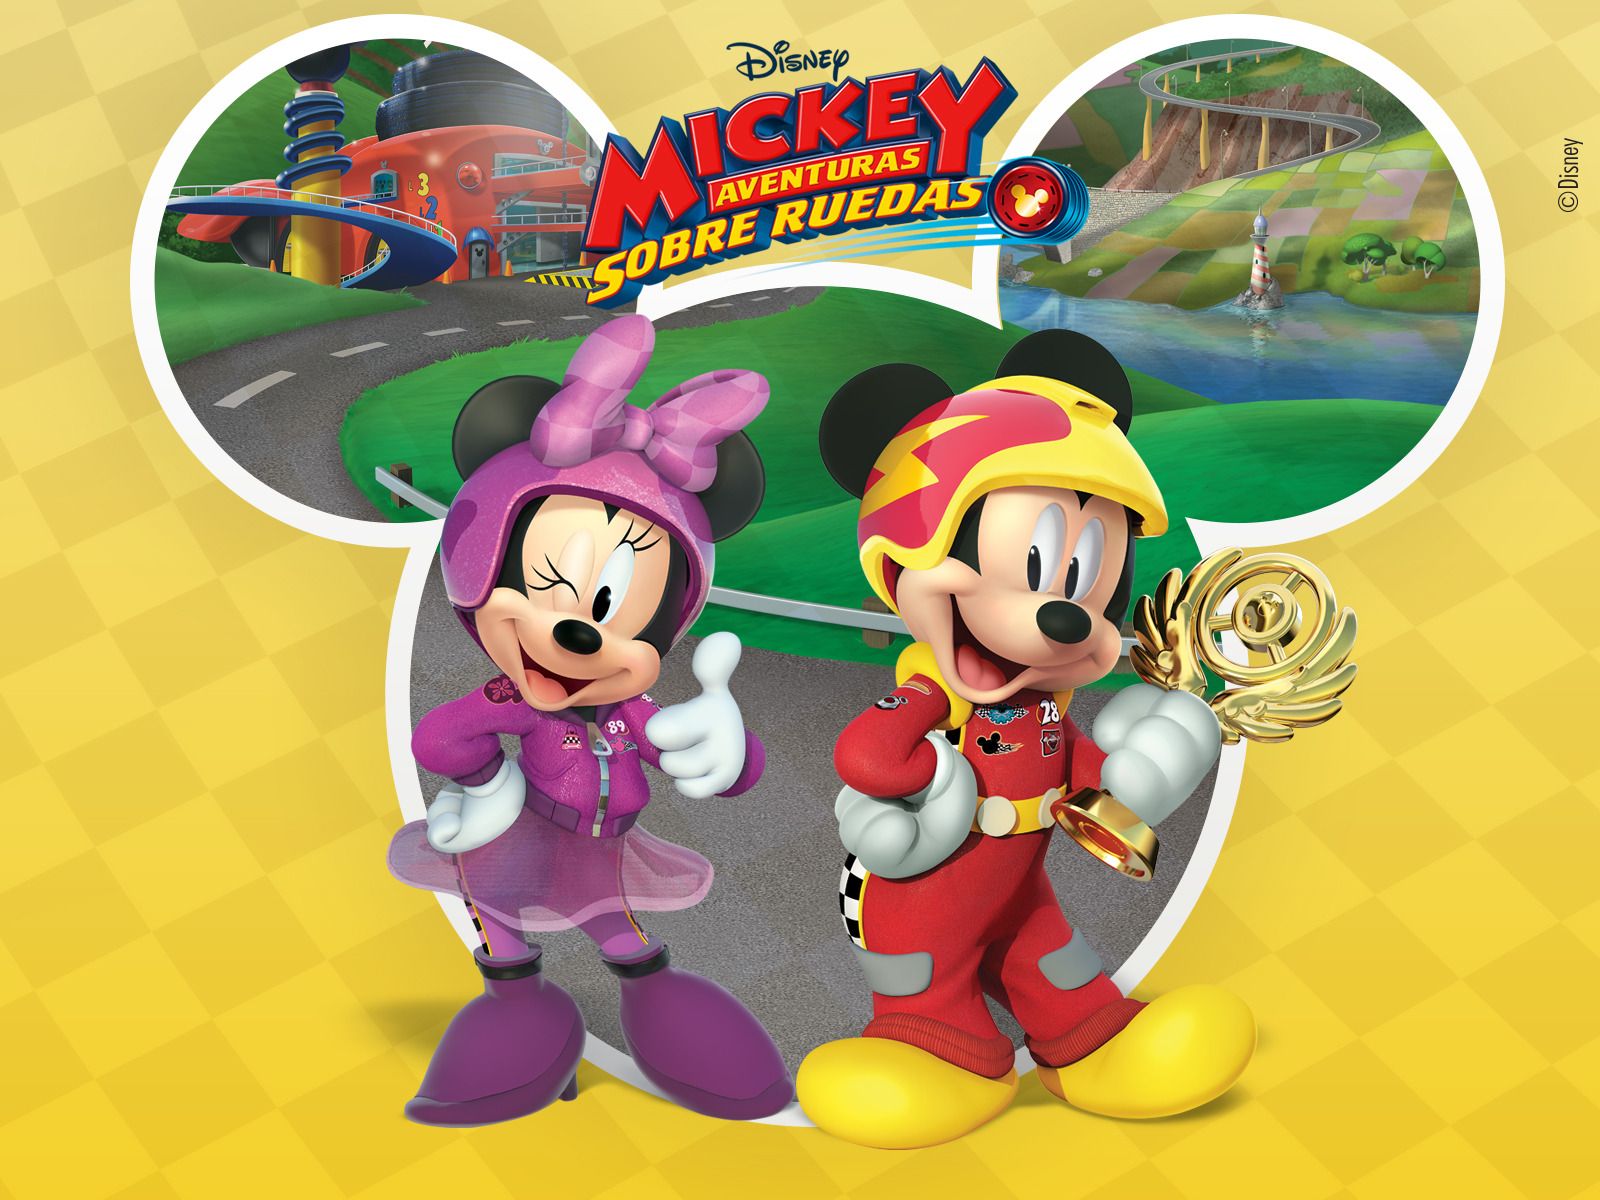 Prime Video: Disney Mickey and the Roadster Racers Season 1